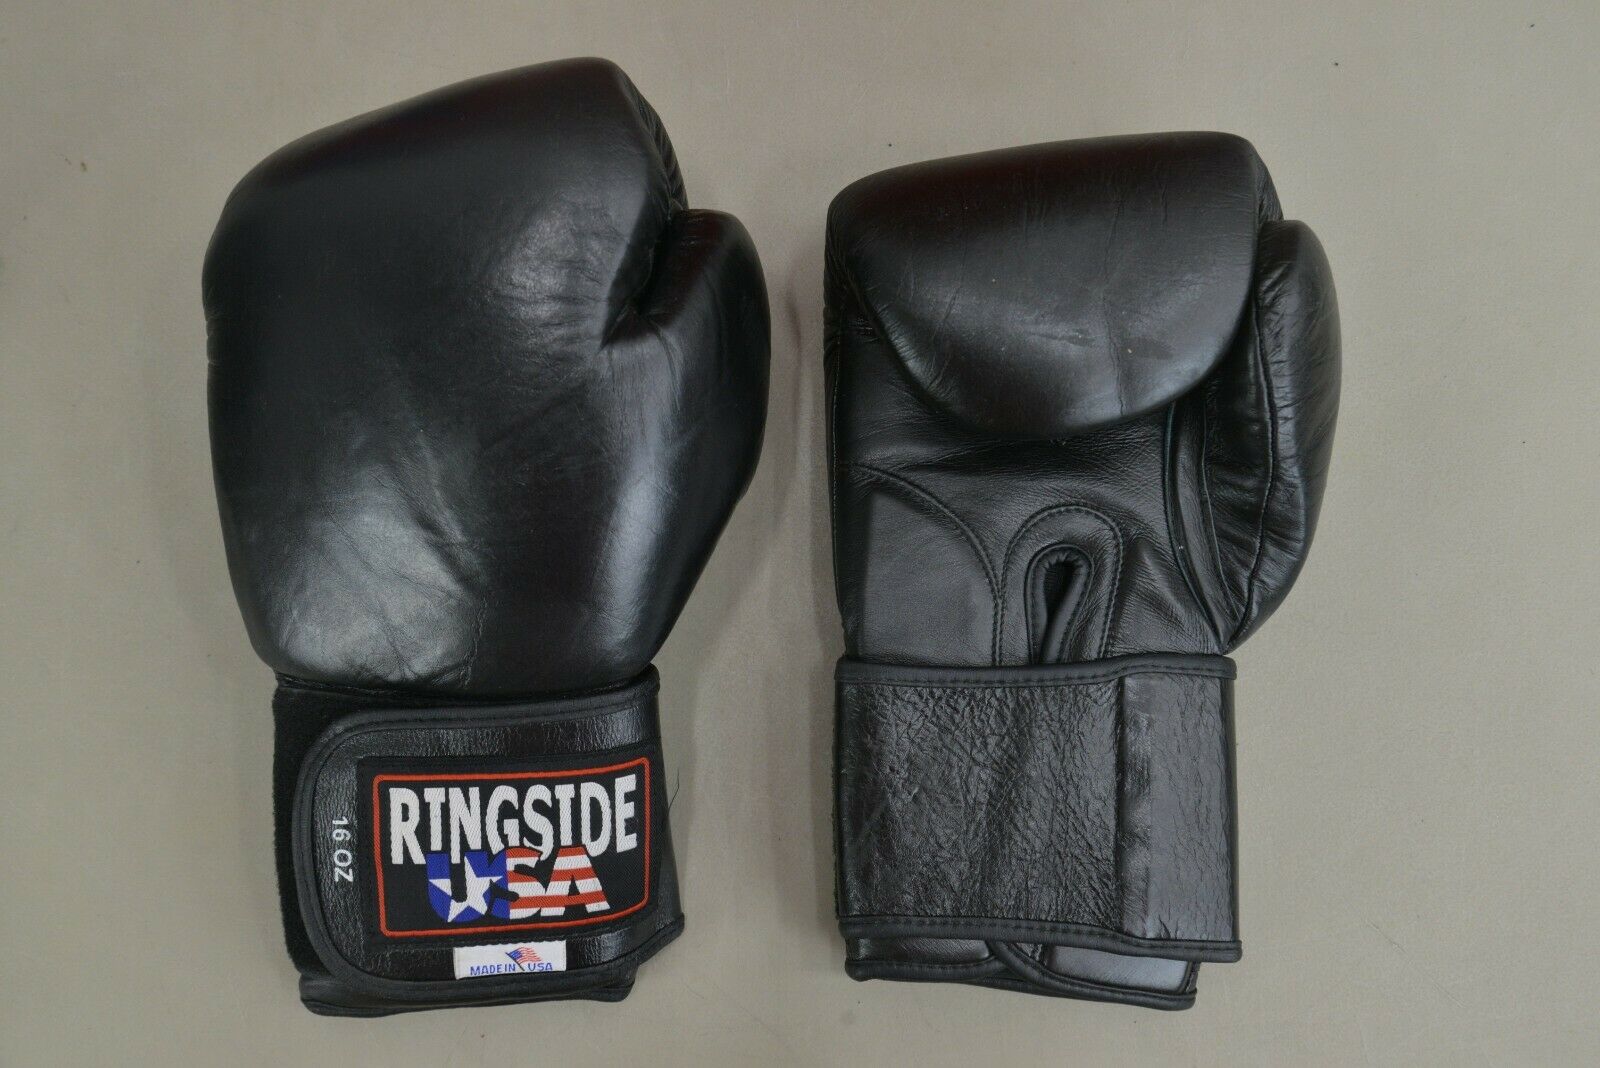 Ringside Boxing Training Gear Martial Arts MMA Fight Gear 24152 WH2 